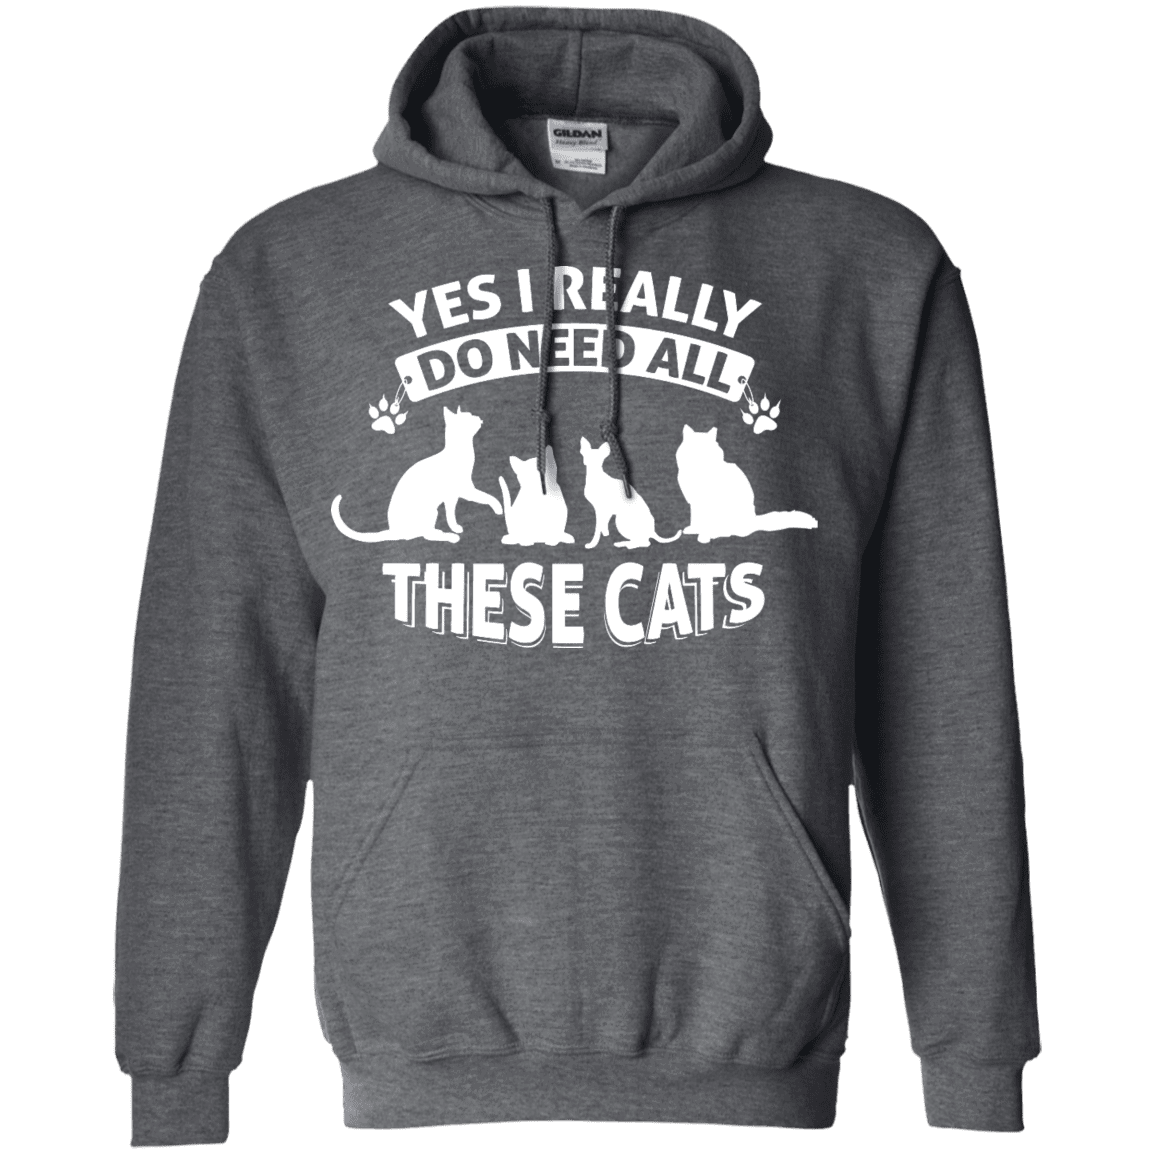 Yes I Need All These Cats - Hoodie.